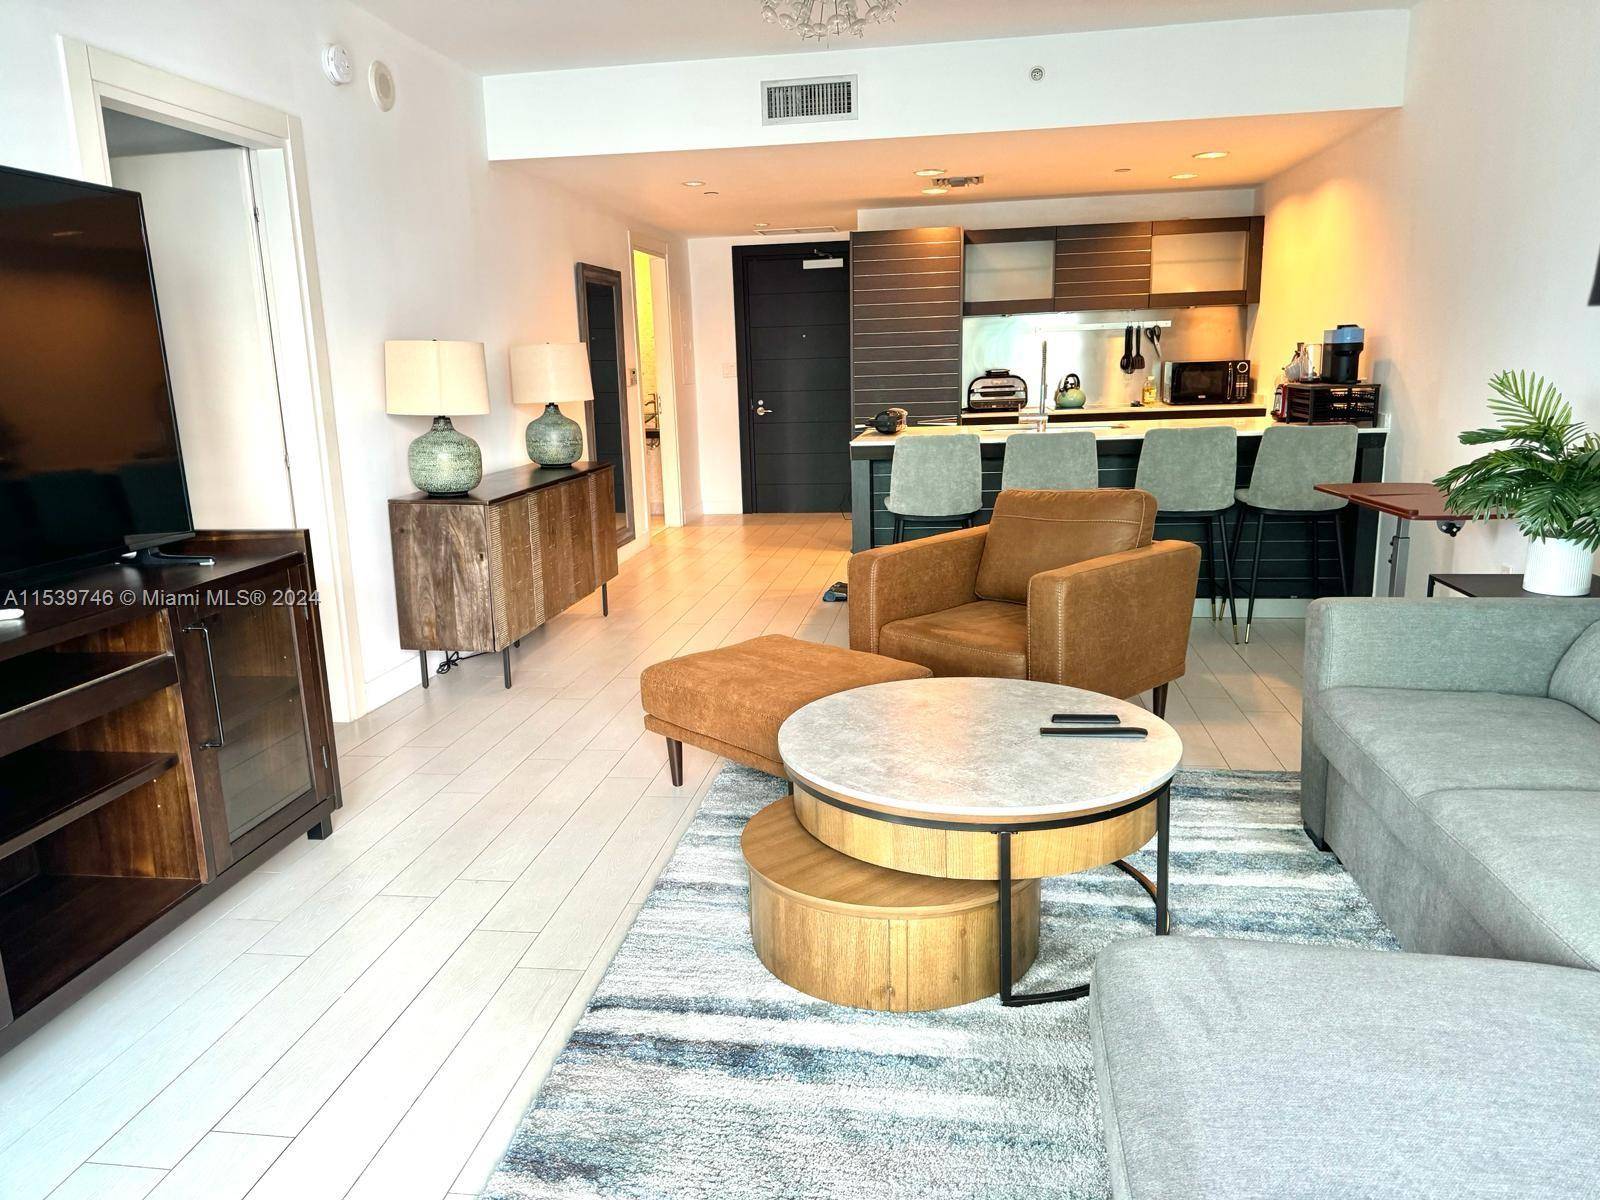 LIVE IN THIS BEAUTIFUL CONDO, Beautiful 1 bedroom 2 baths totally furnished condo, brand new furniture, Live in one of the most amazing buildings, EPIC, enjoy al fresco dinning in ...